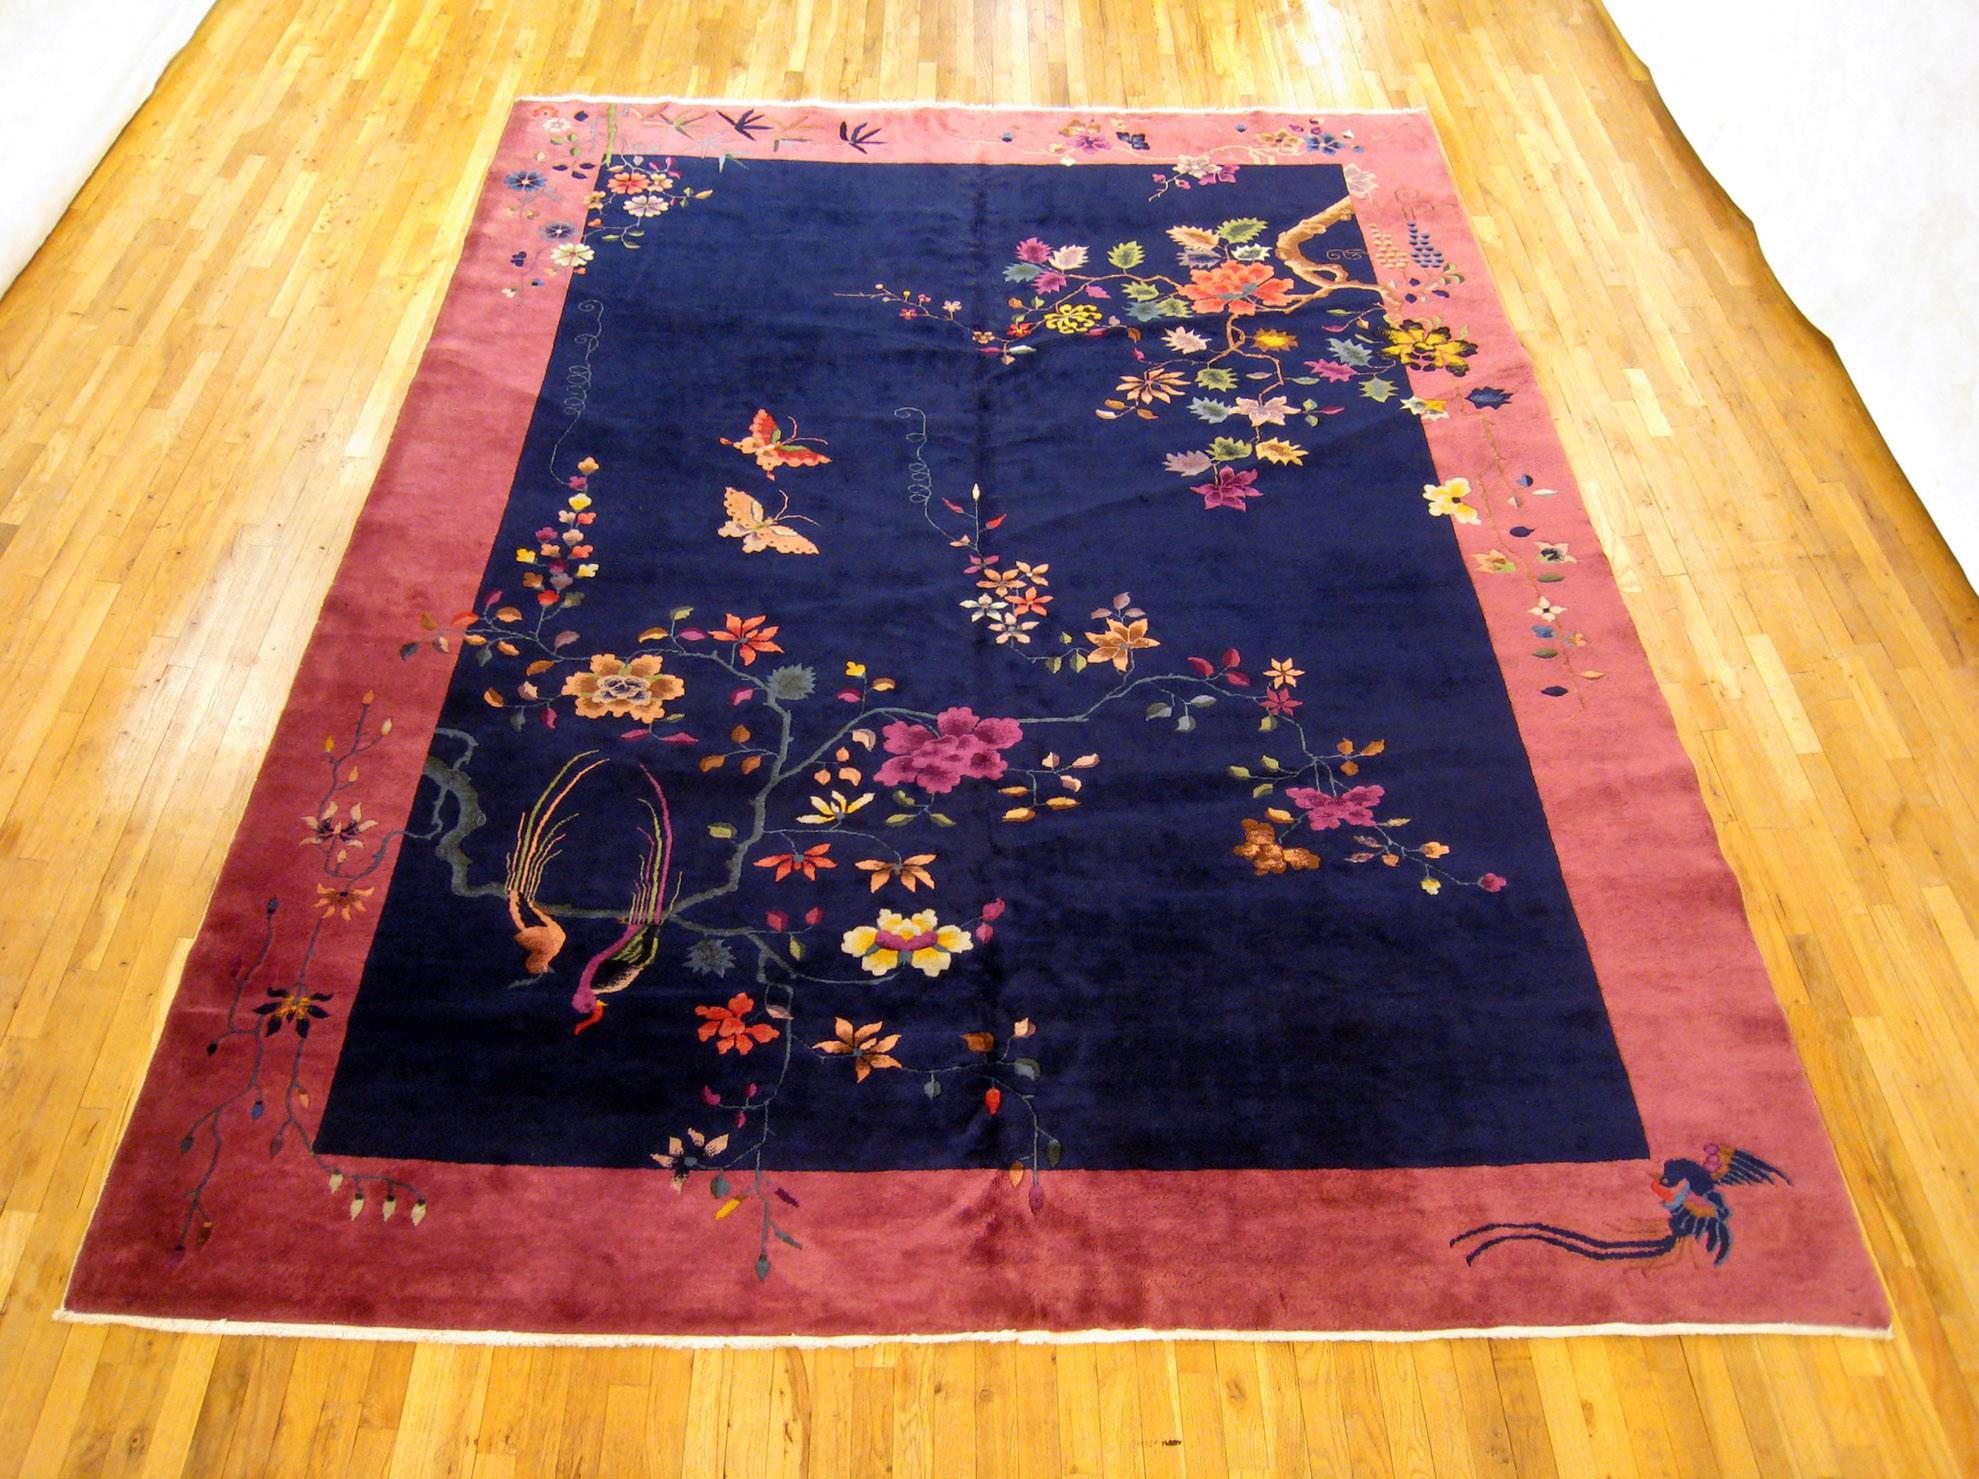 Antique Chinese Art deco rug, Room size, circa 1920

A one-of-a-kind antique Chinese Art deco oriental carpet, hand-knotted with medium thickness wool pile. This beautiful rug features art deco motifs allover a large blue open field, with a